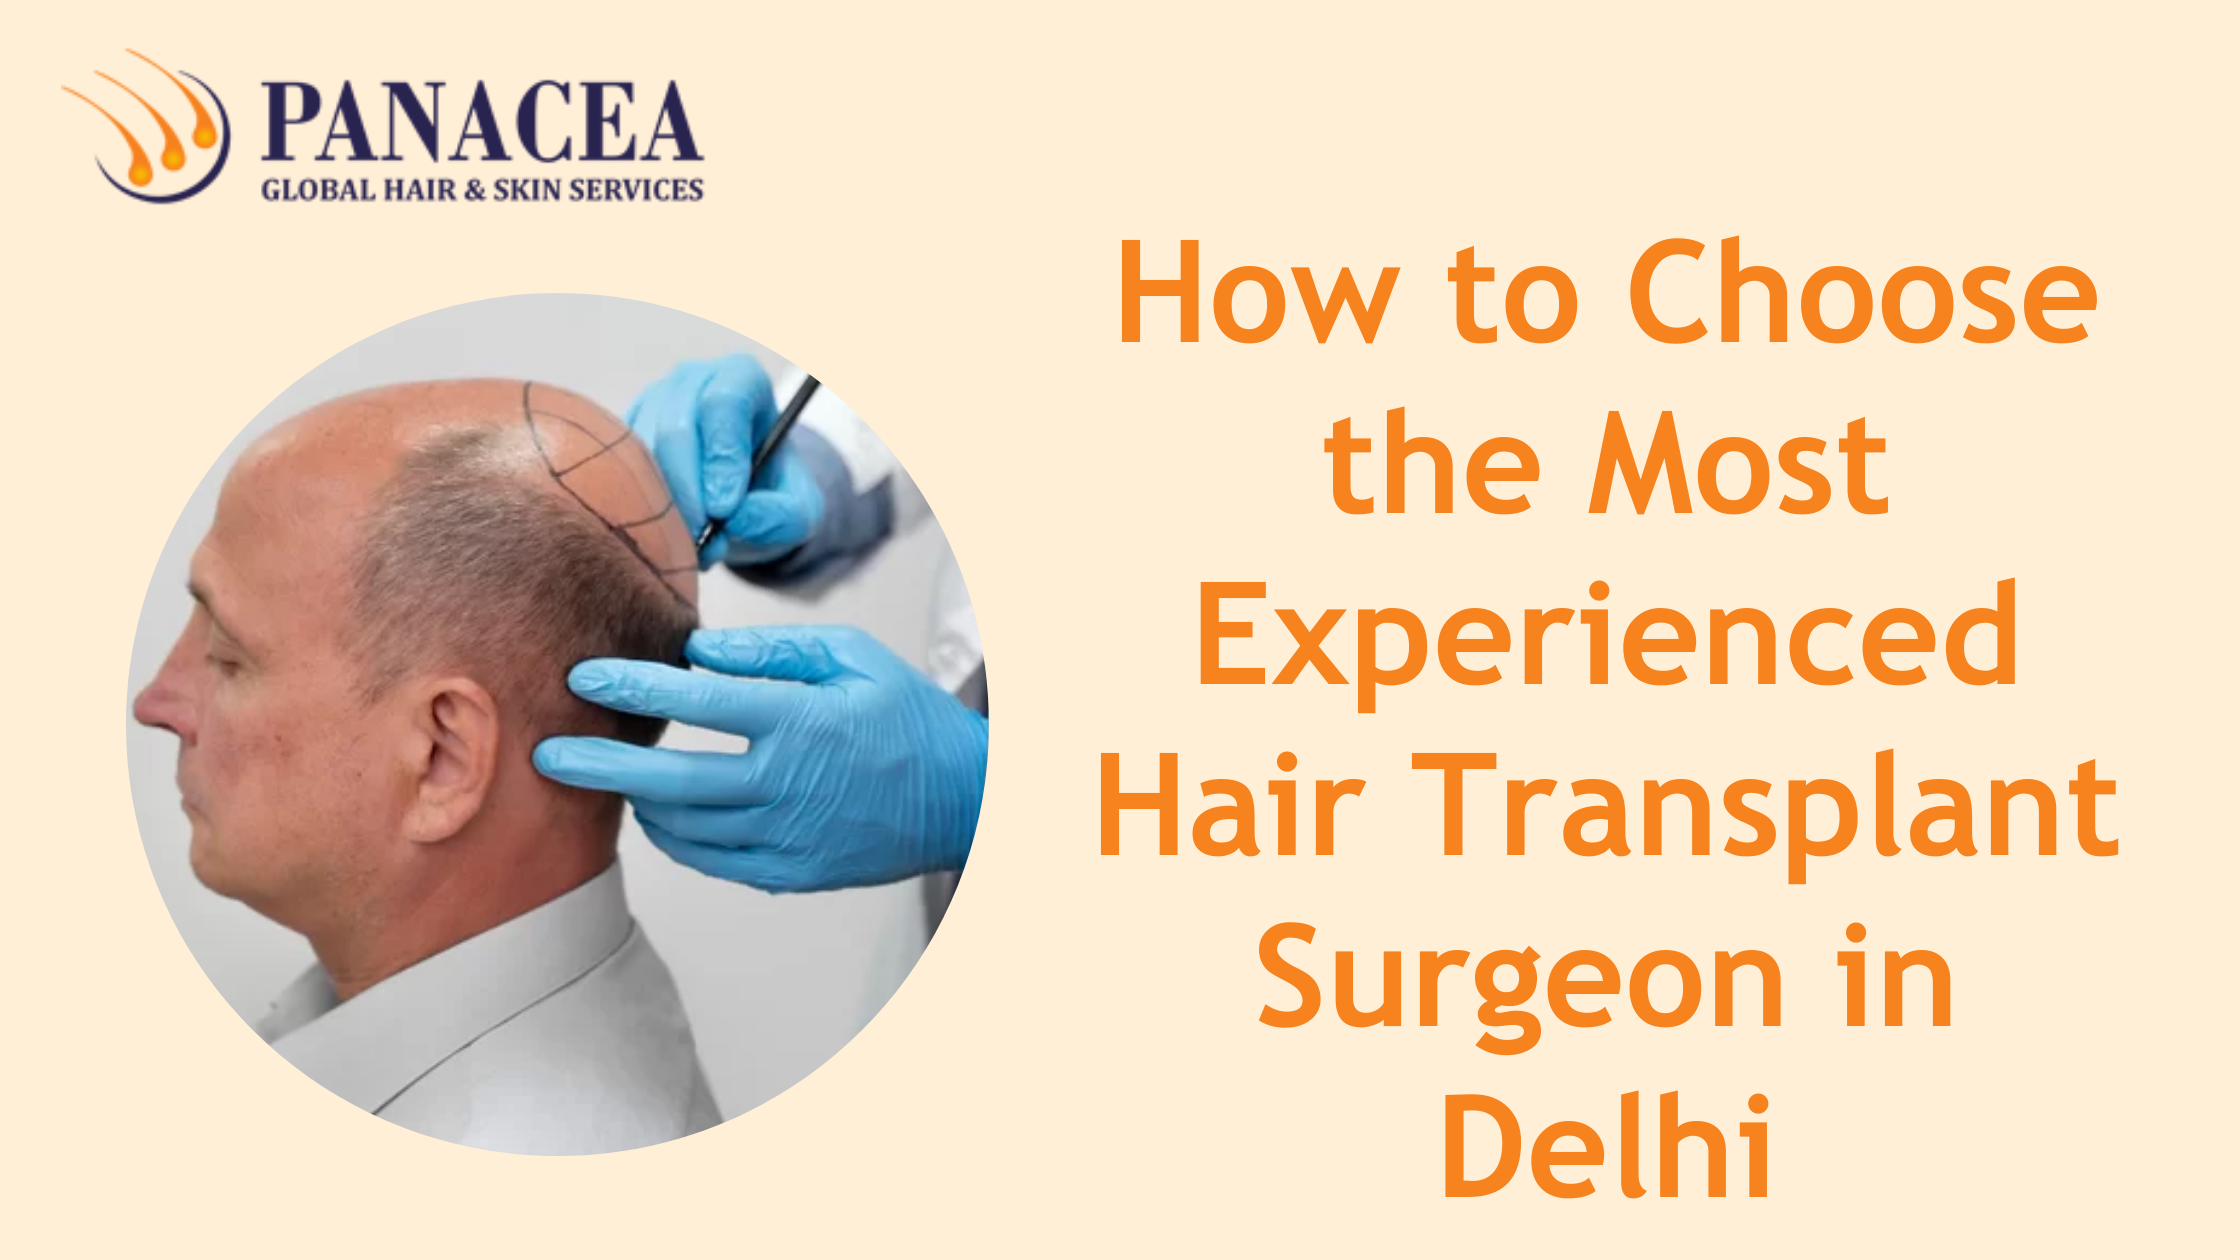 How to Choose the Most Experienced Hair Transplant Surgeon in Delhi